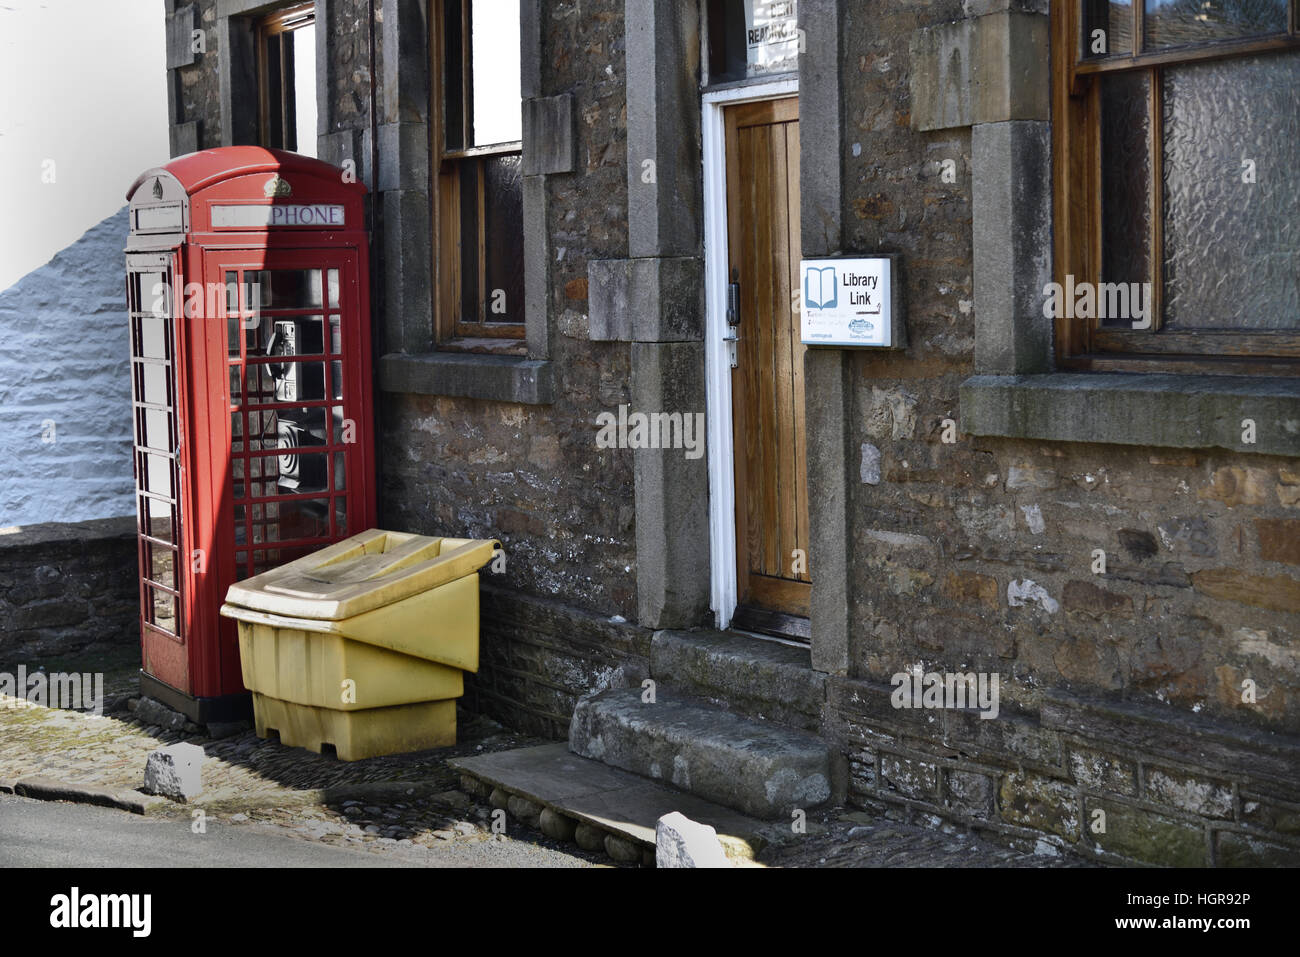 Dent library, red phone box, yellow grit bin, Dent village, Yorkshire Dales National Park, Cumbria, England, UK. Stock Photo